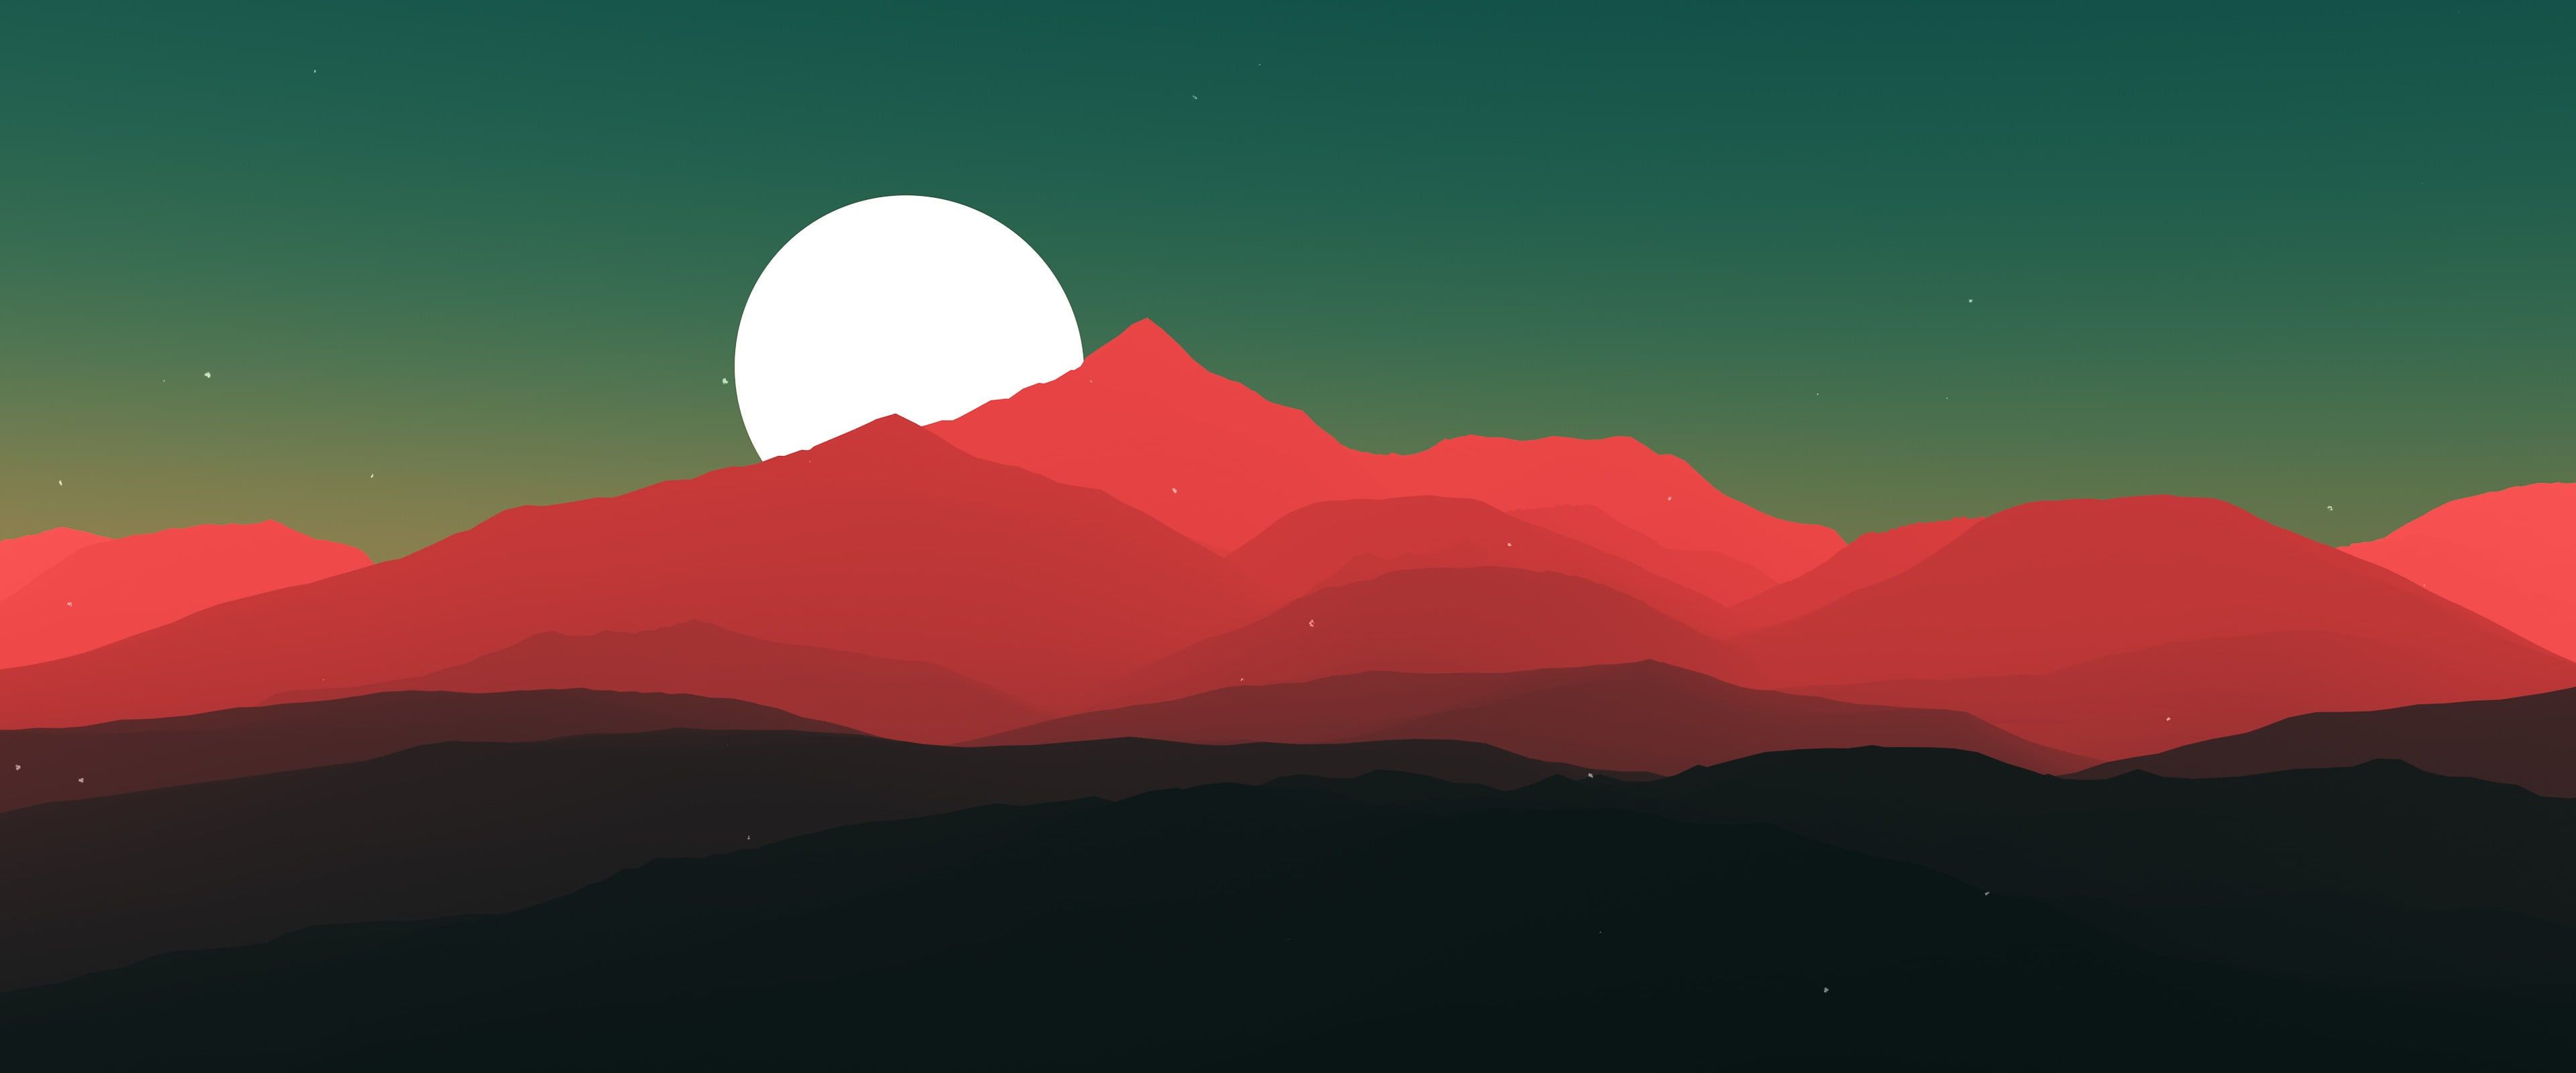 Red And Black Mountains - HD Wallpaper 